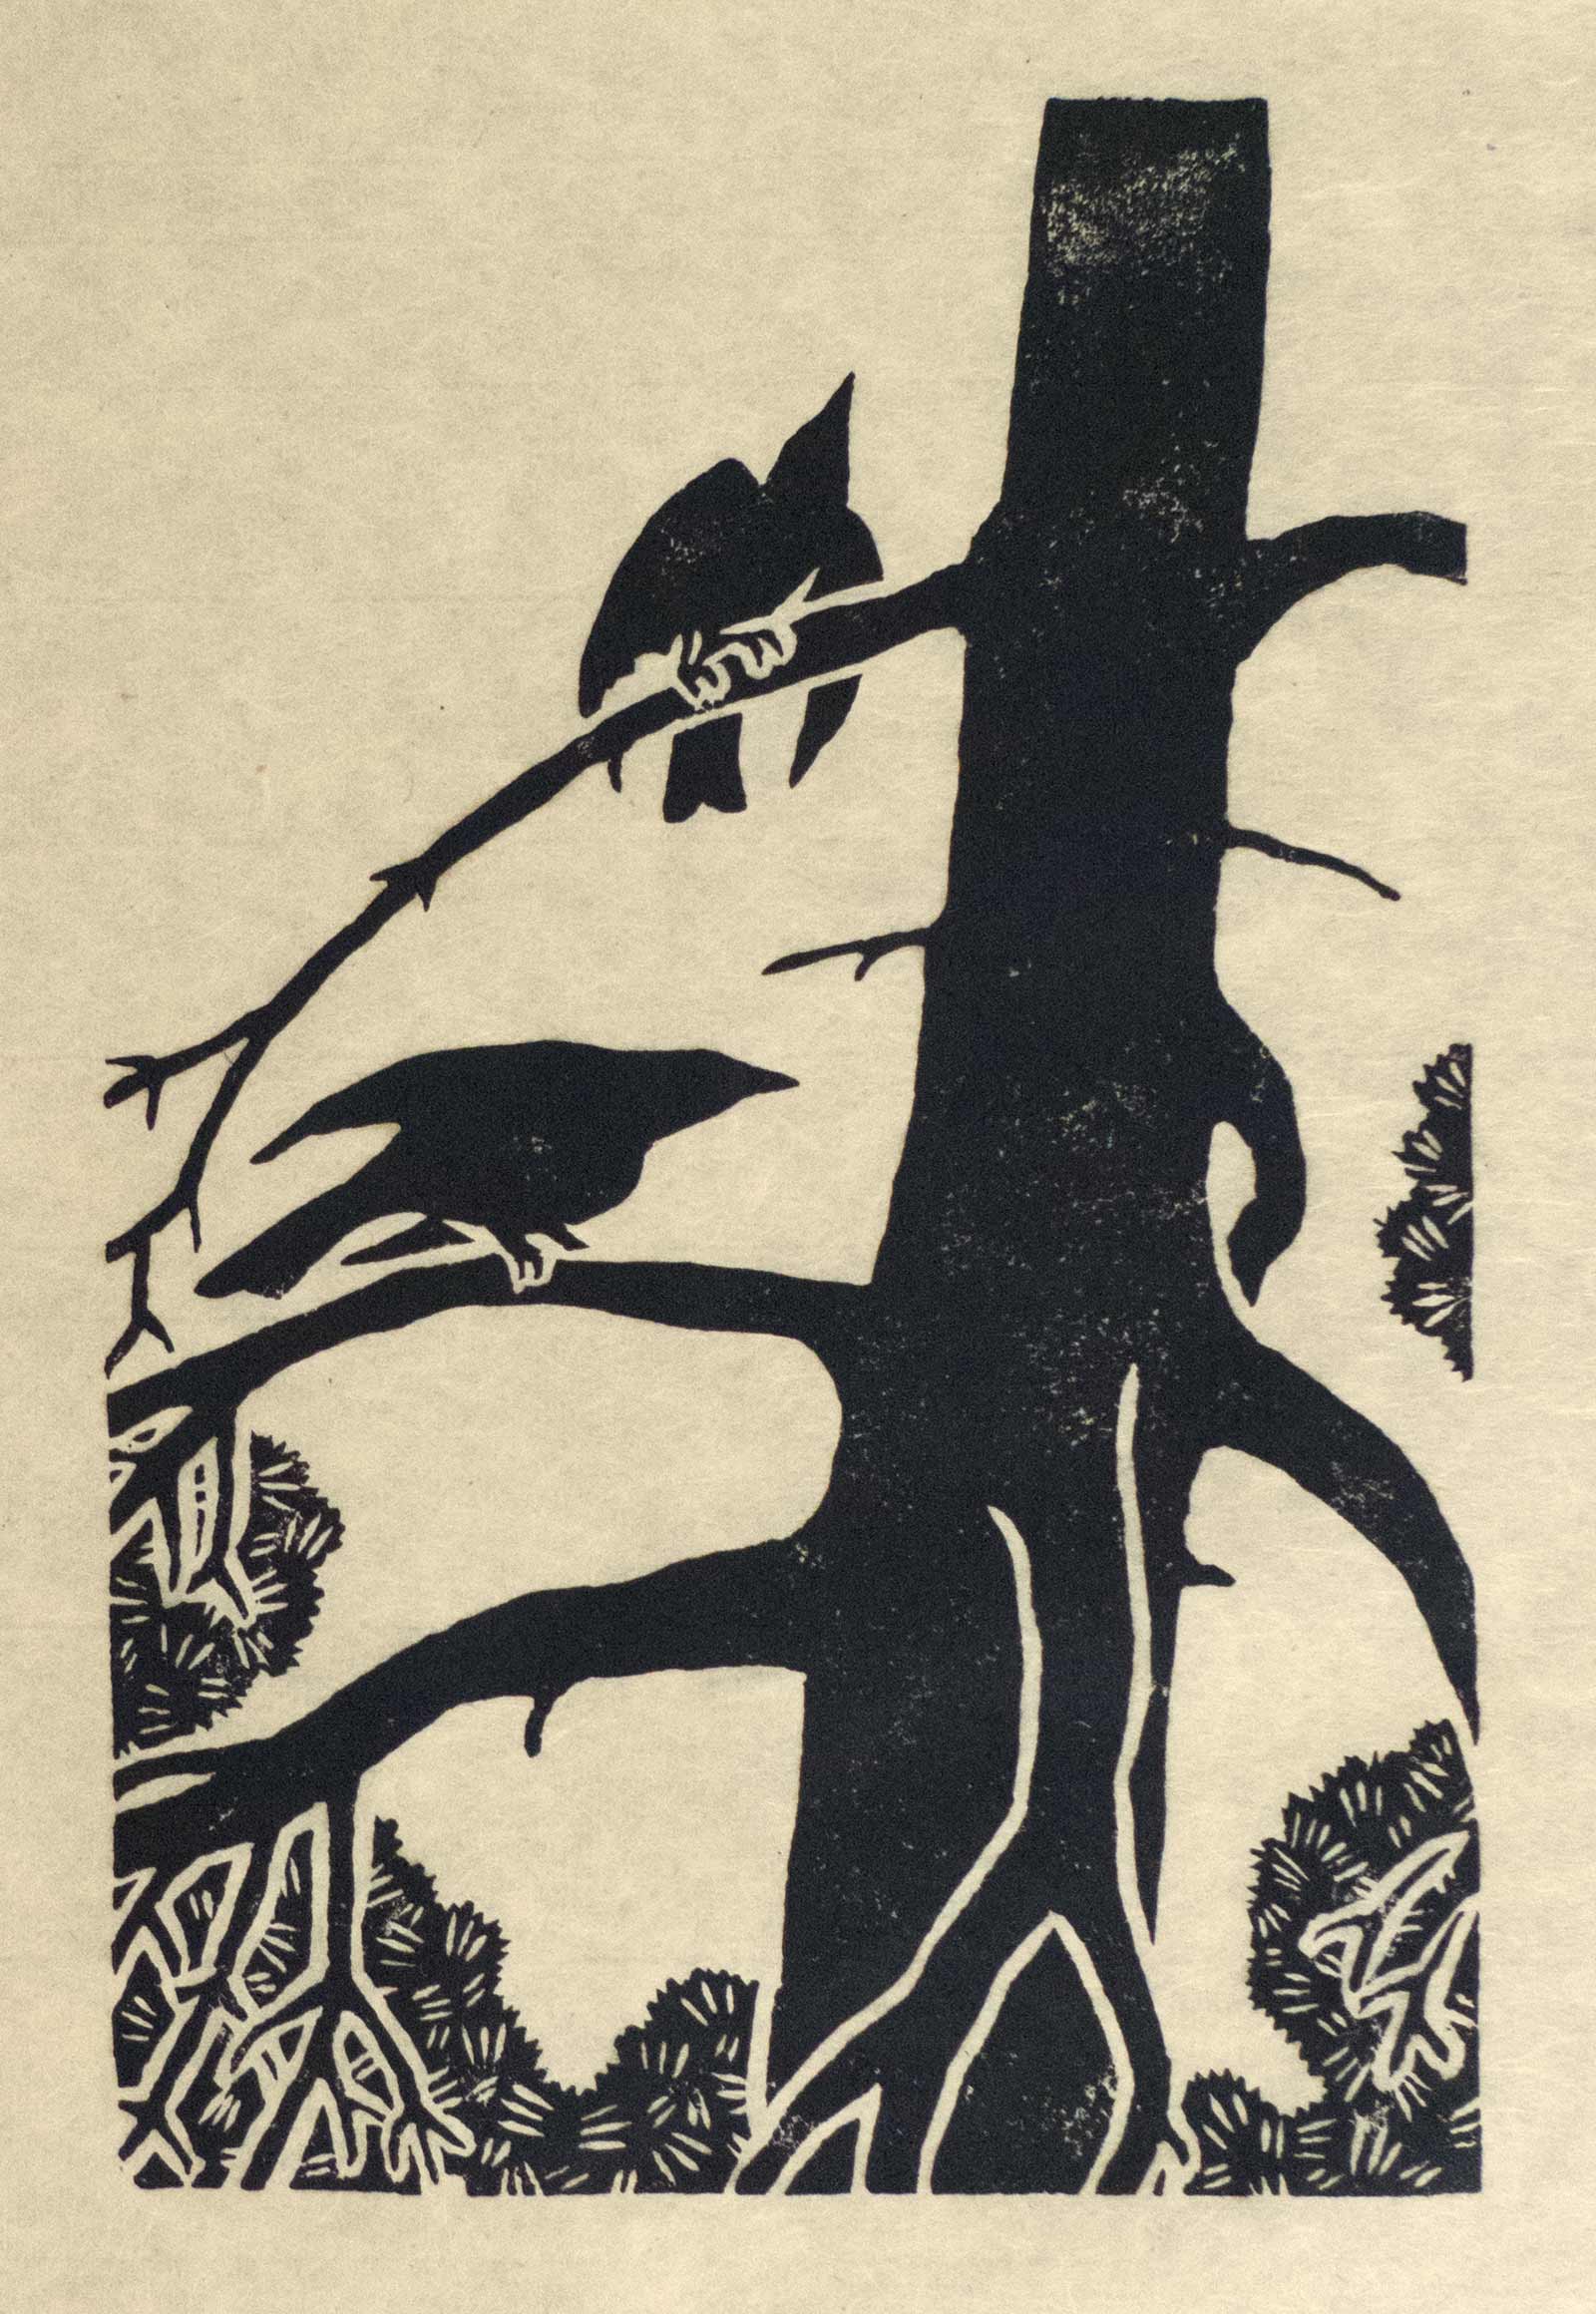 Crows in Pines; 1985; linoleum block print; edition of 20; image size 9” x 6”